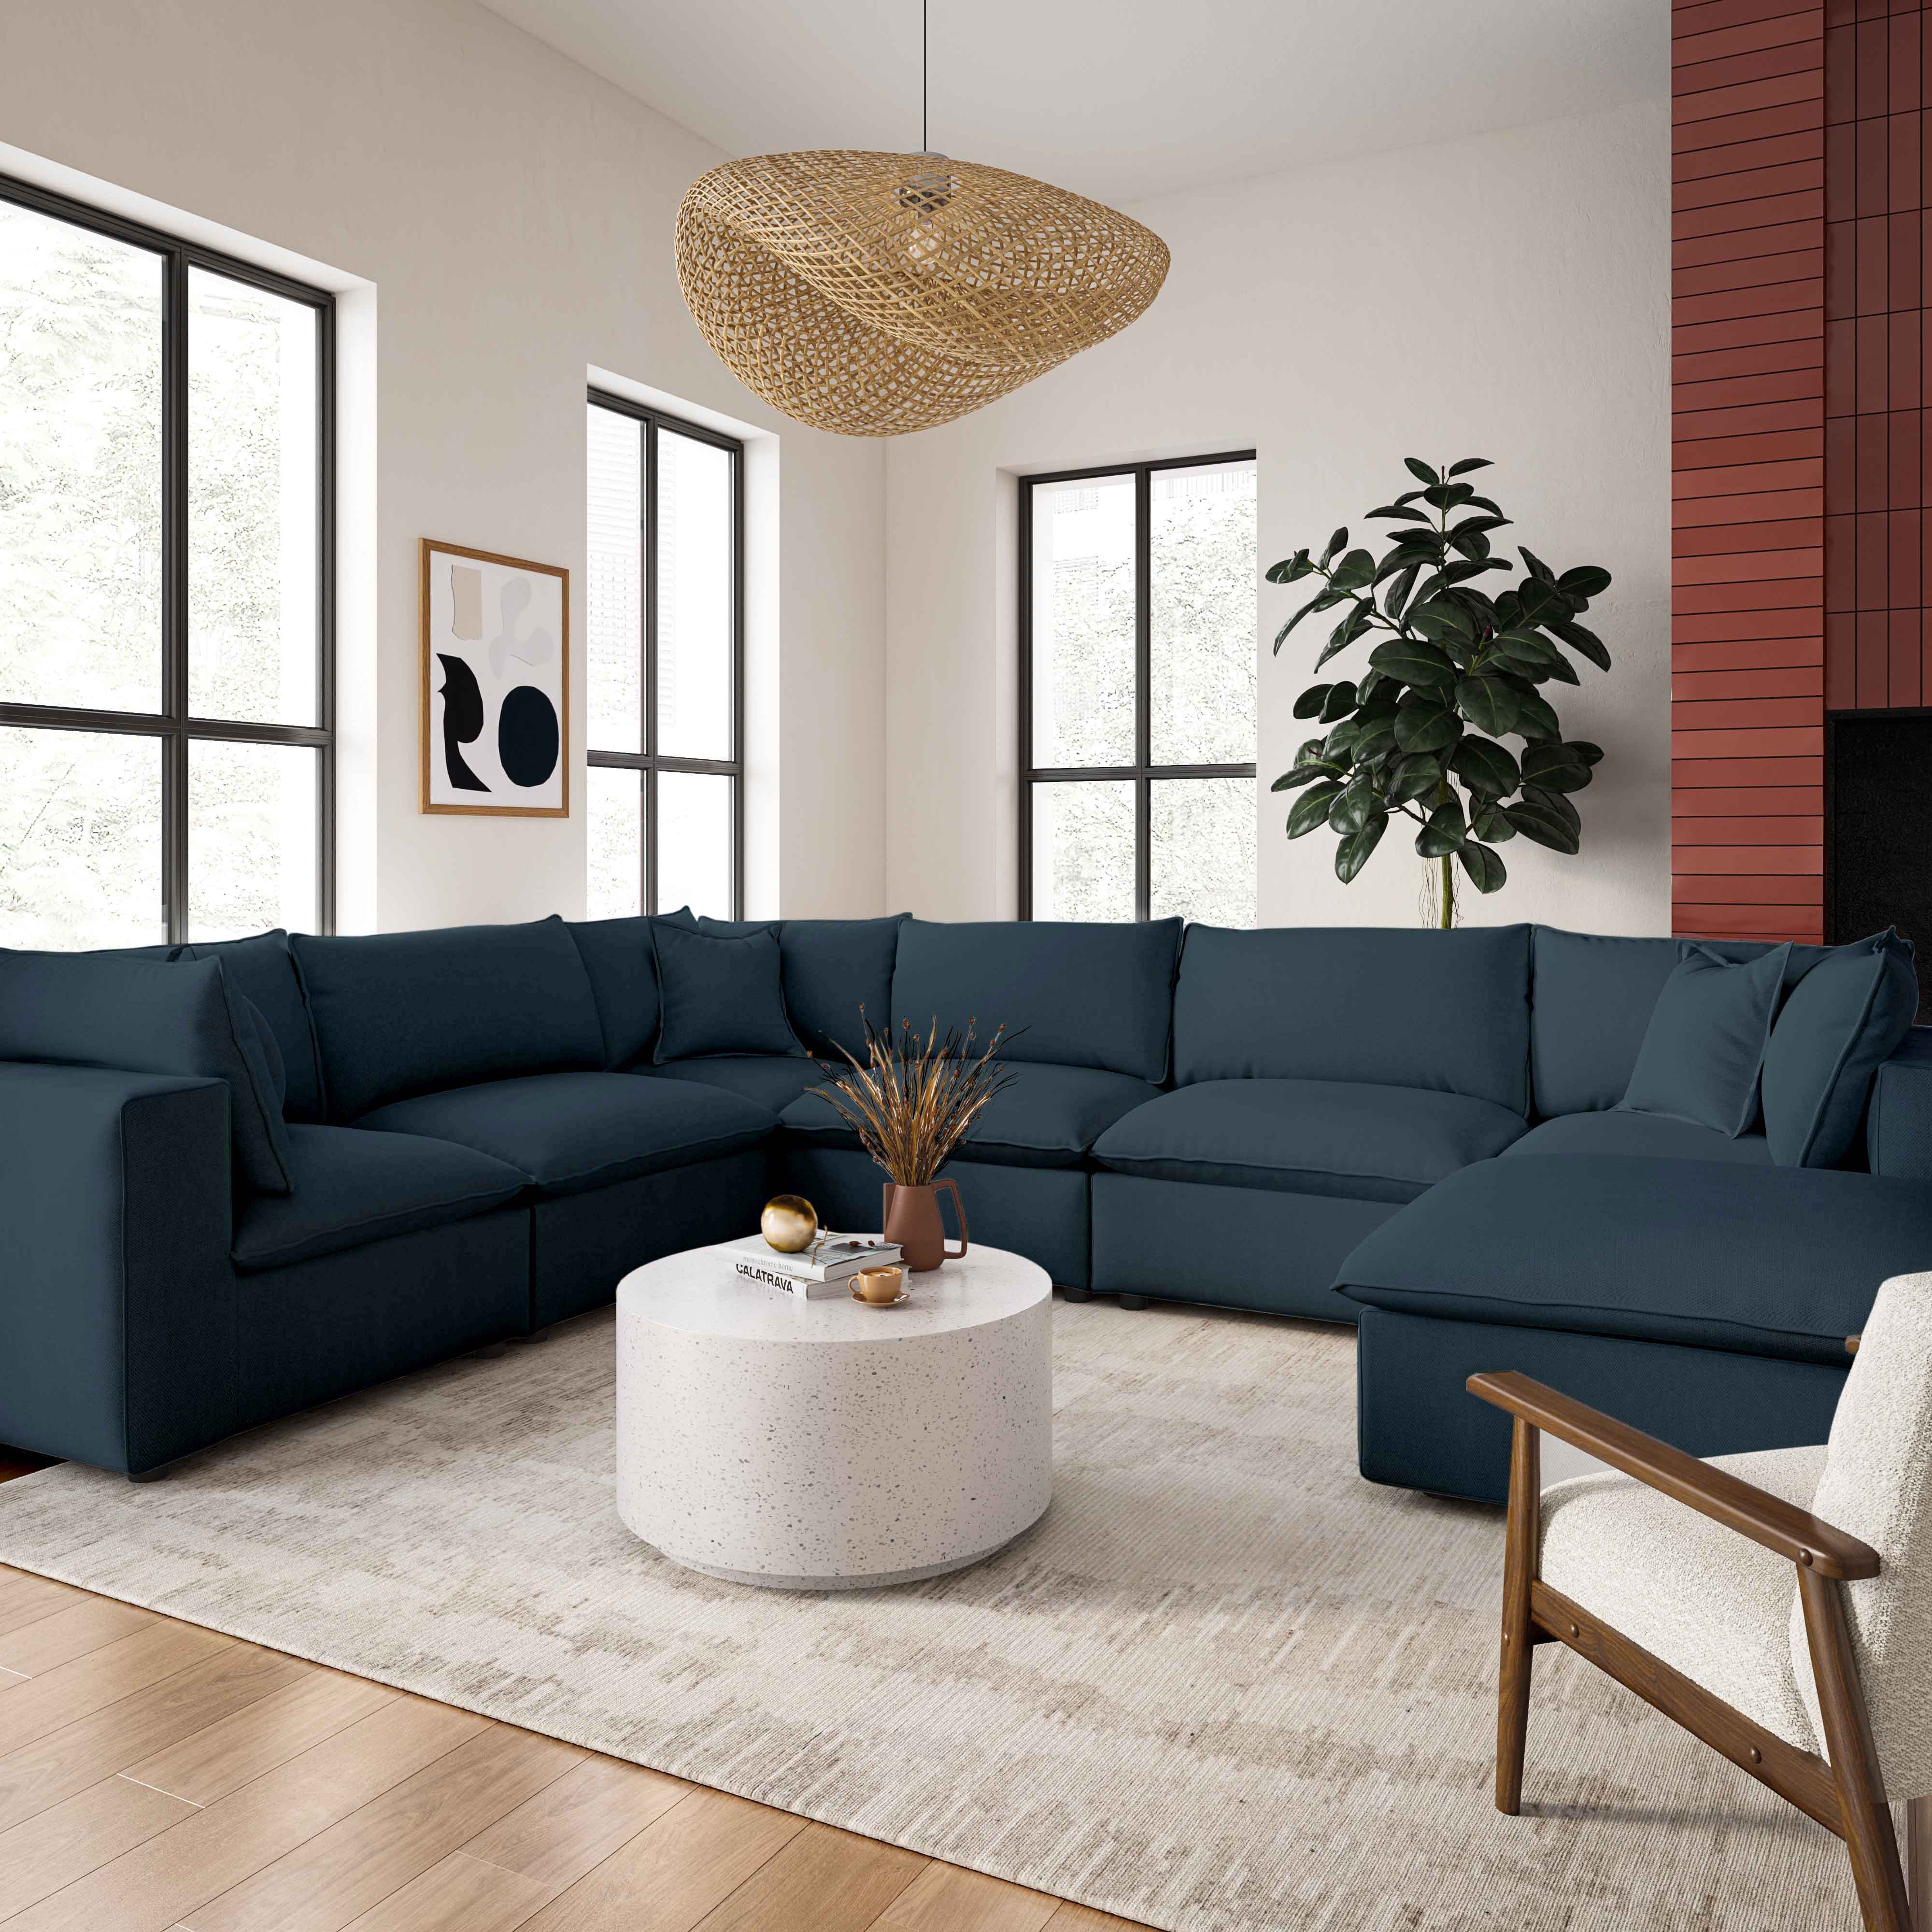 Cali Navy Modular Large Chaise Sectional - Image 1